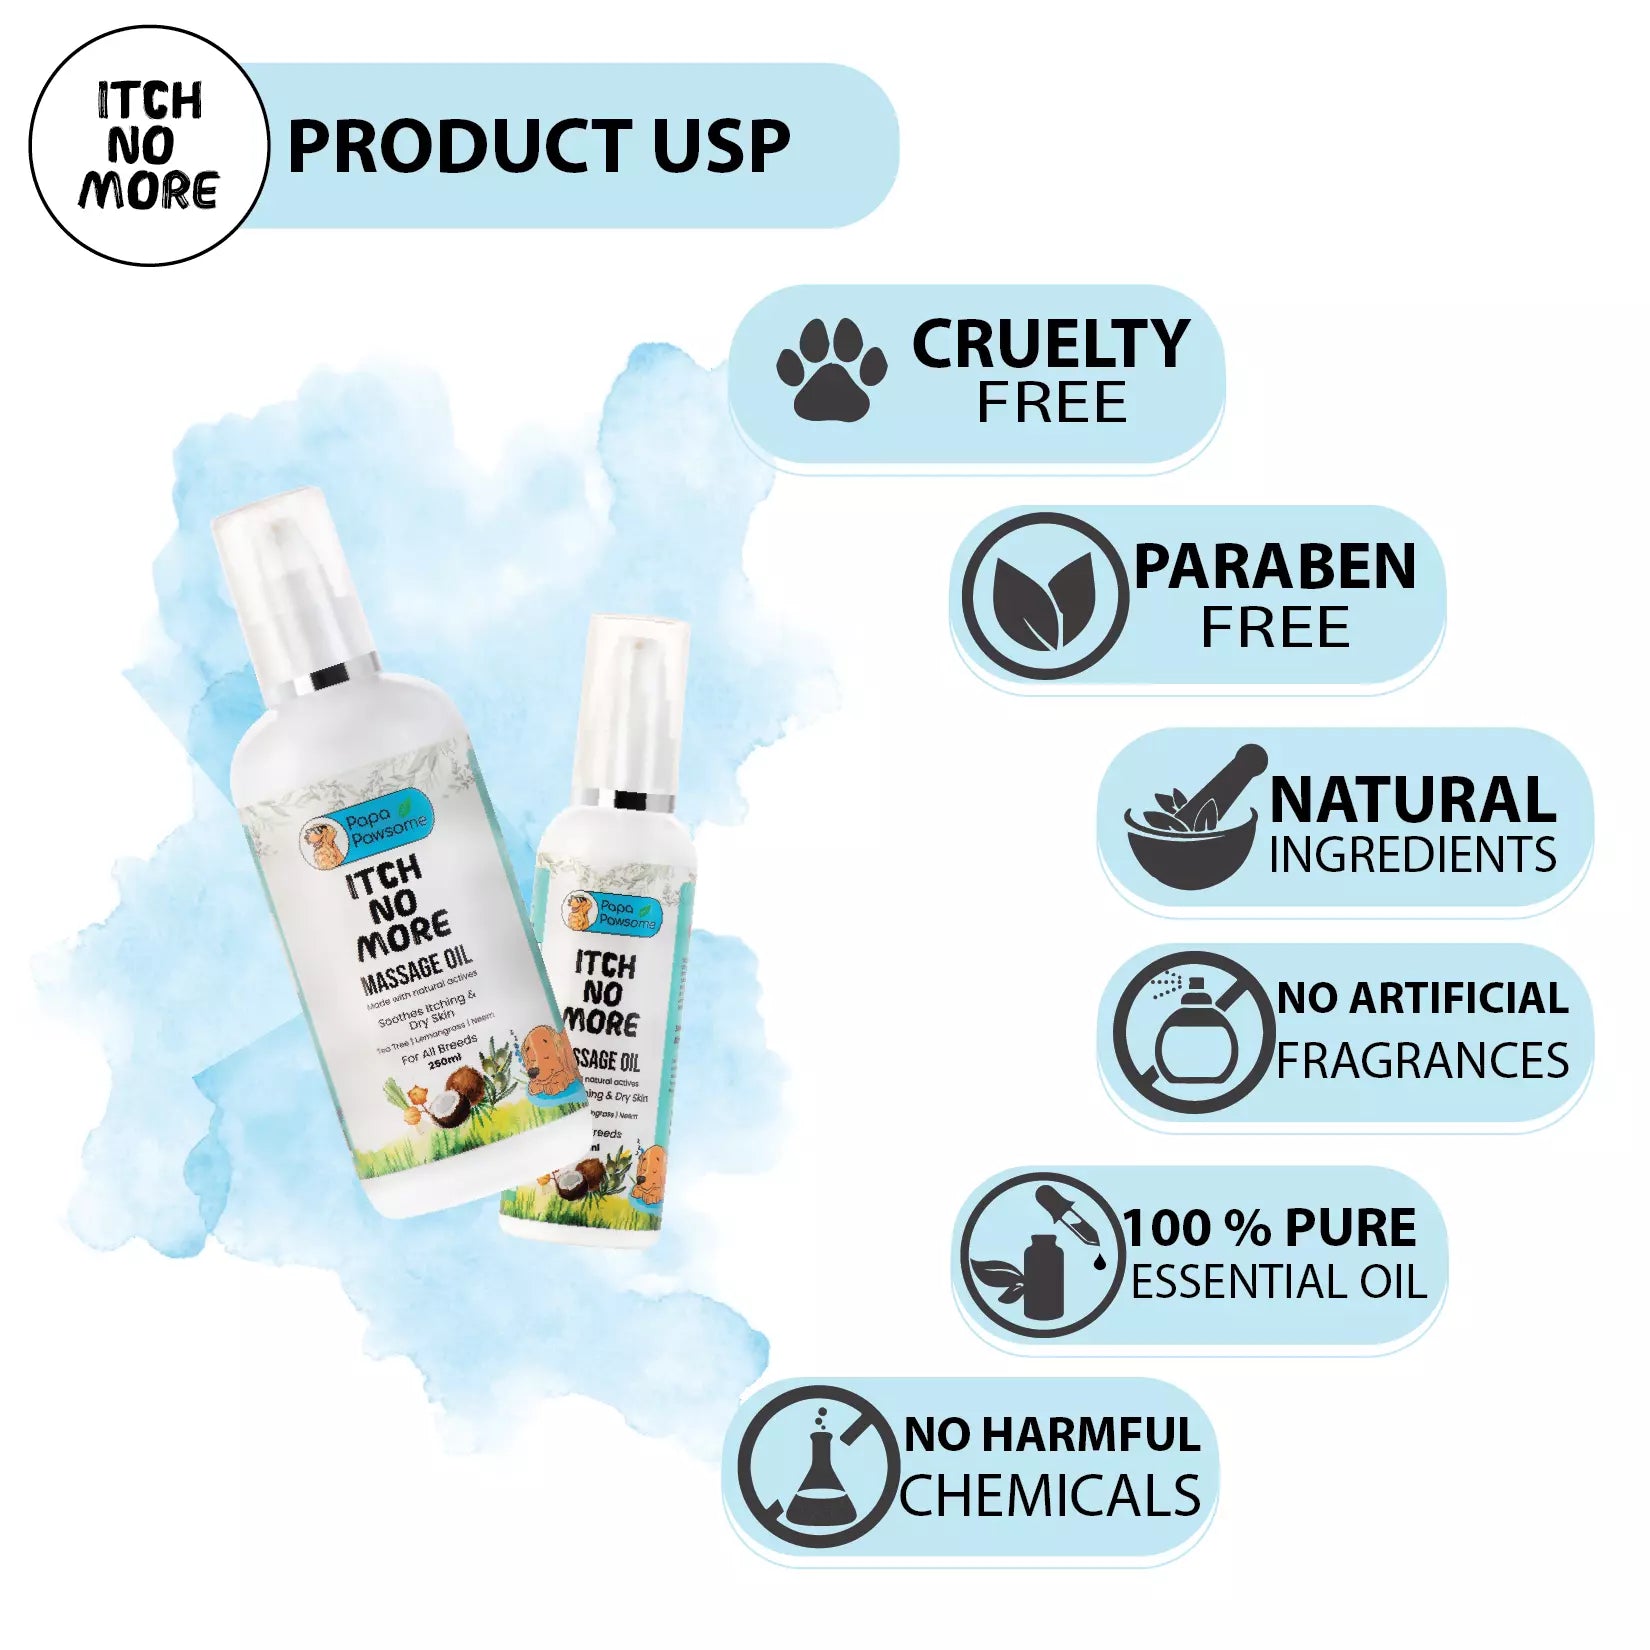 Product features: Cruelty-free, paraben-free, made with natural ingredients, no artificial fragrances, 100% pure essential oils, no harmful chemicals.